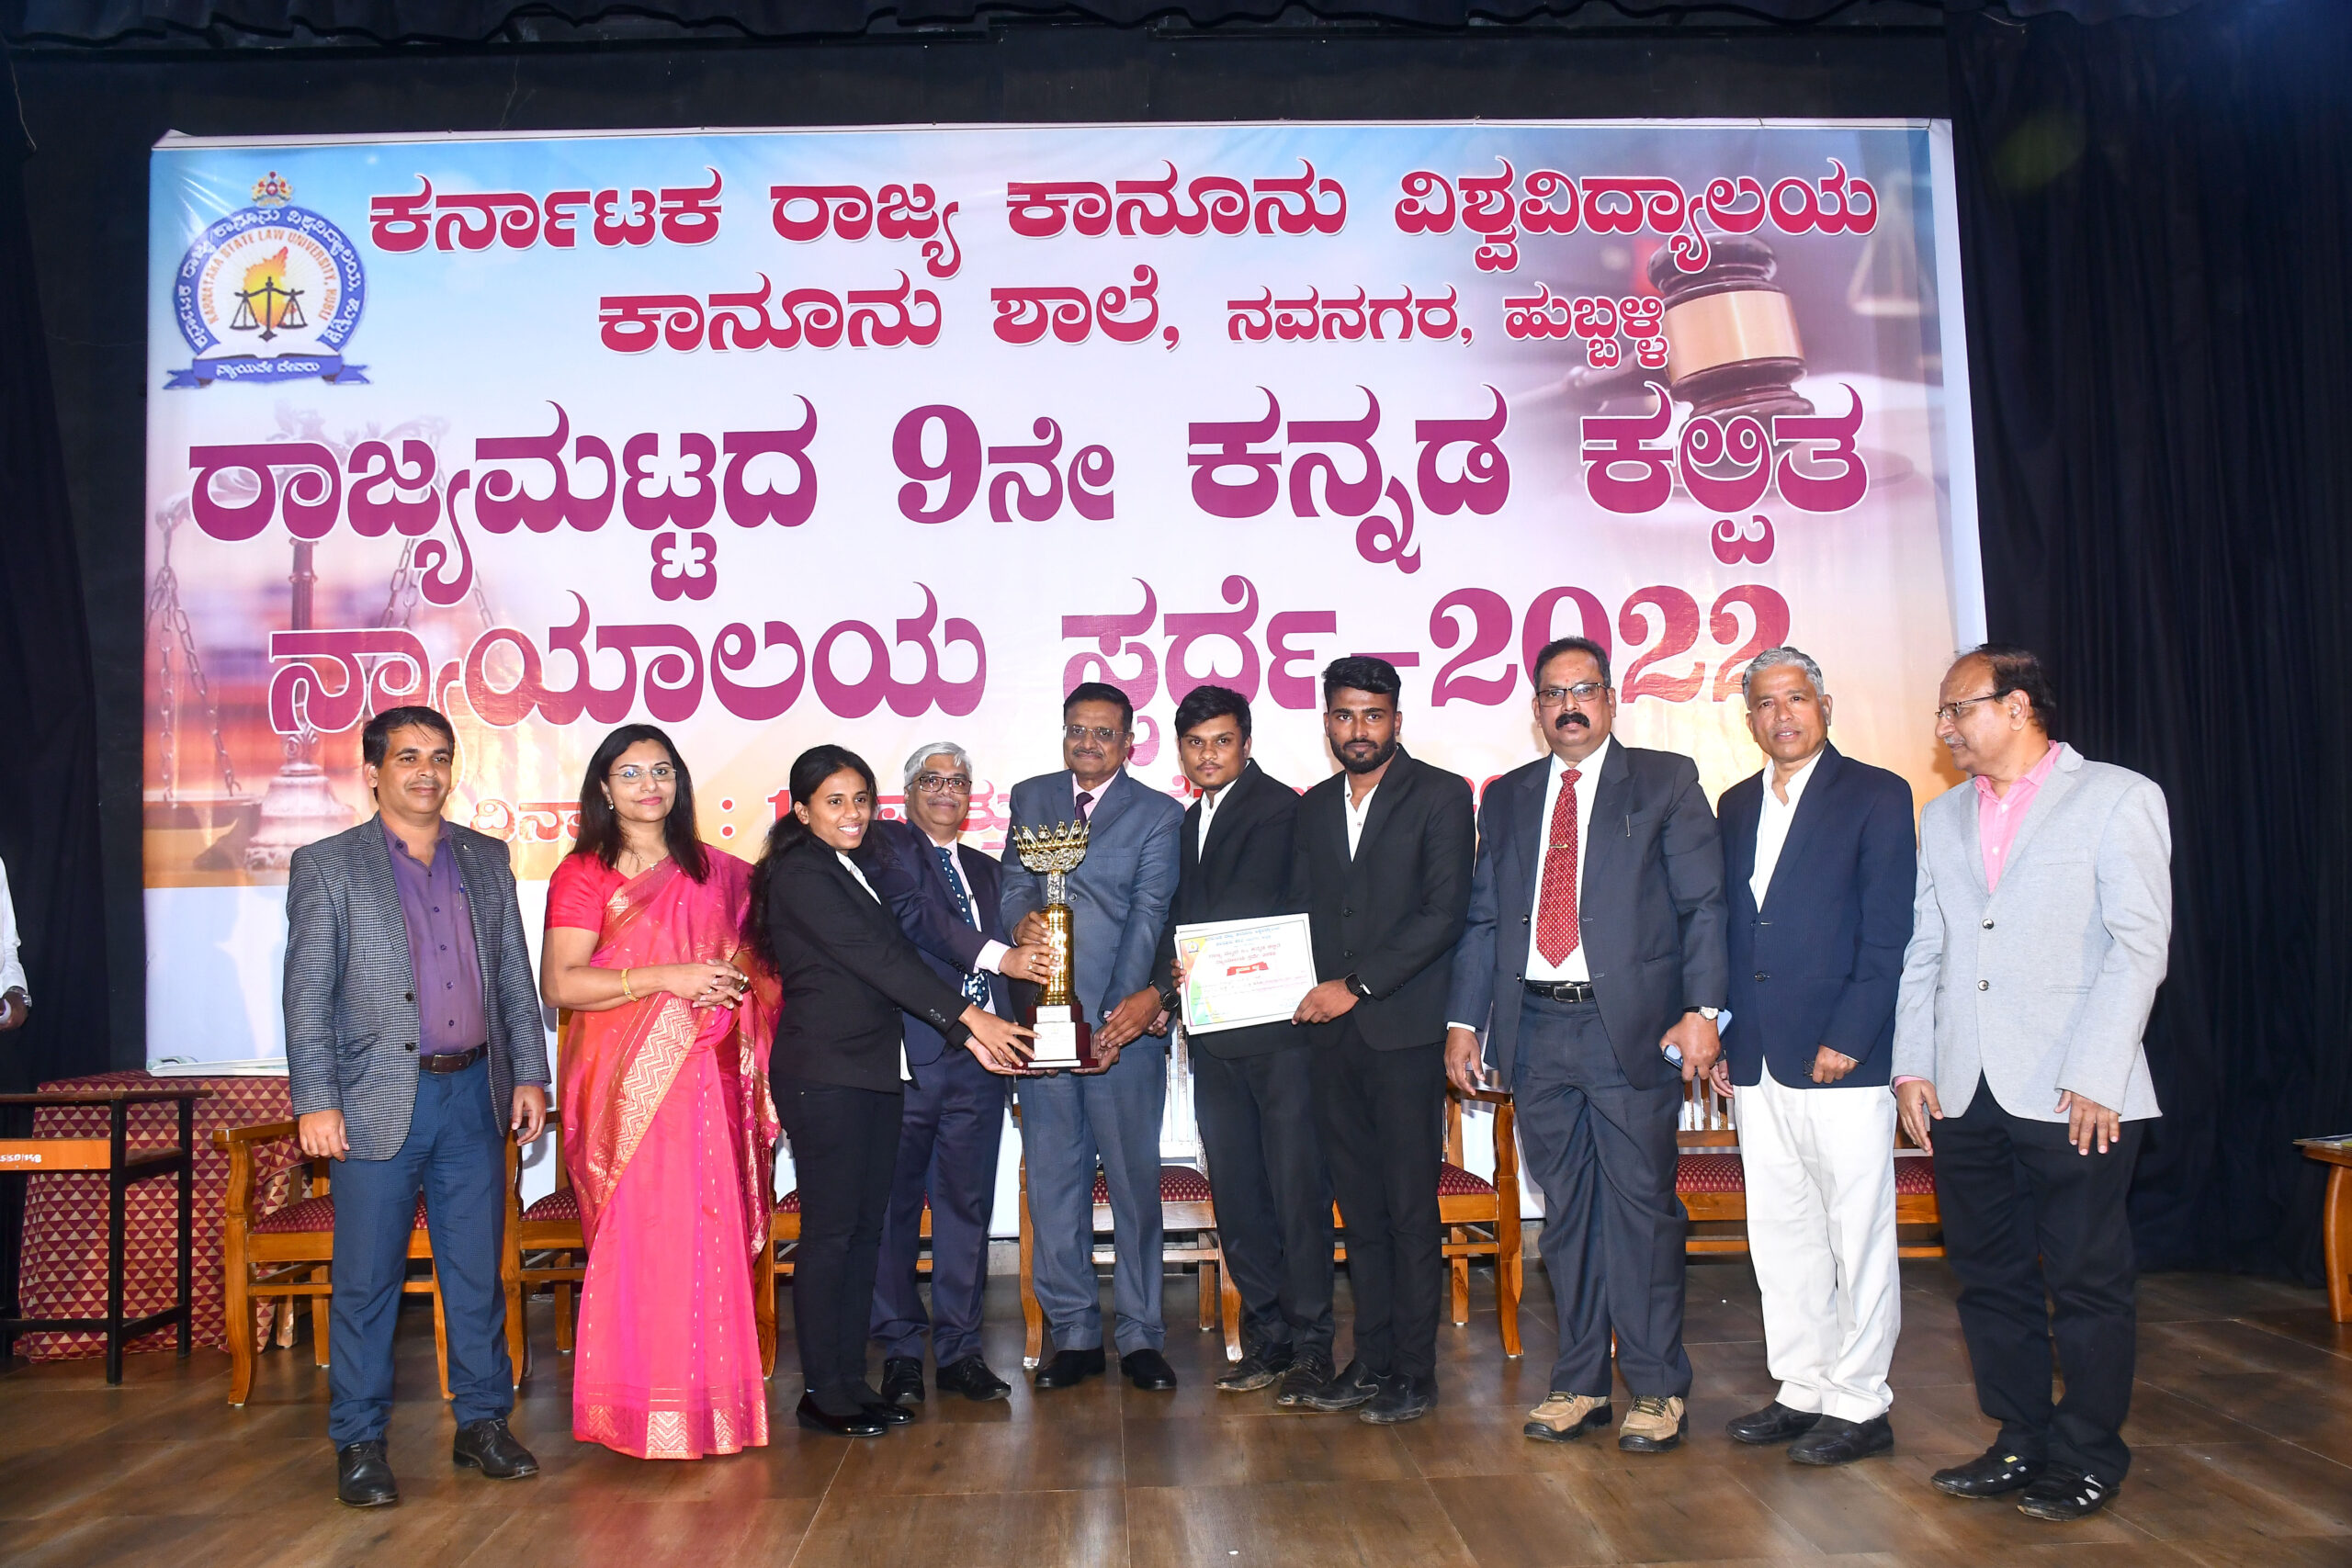 Runner up place in “9th Kannada State Level Moot Court Competition”